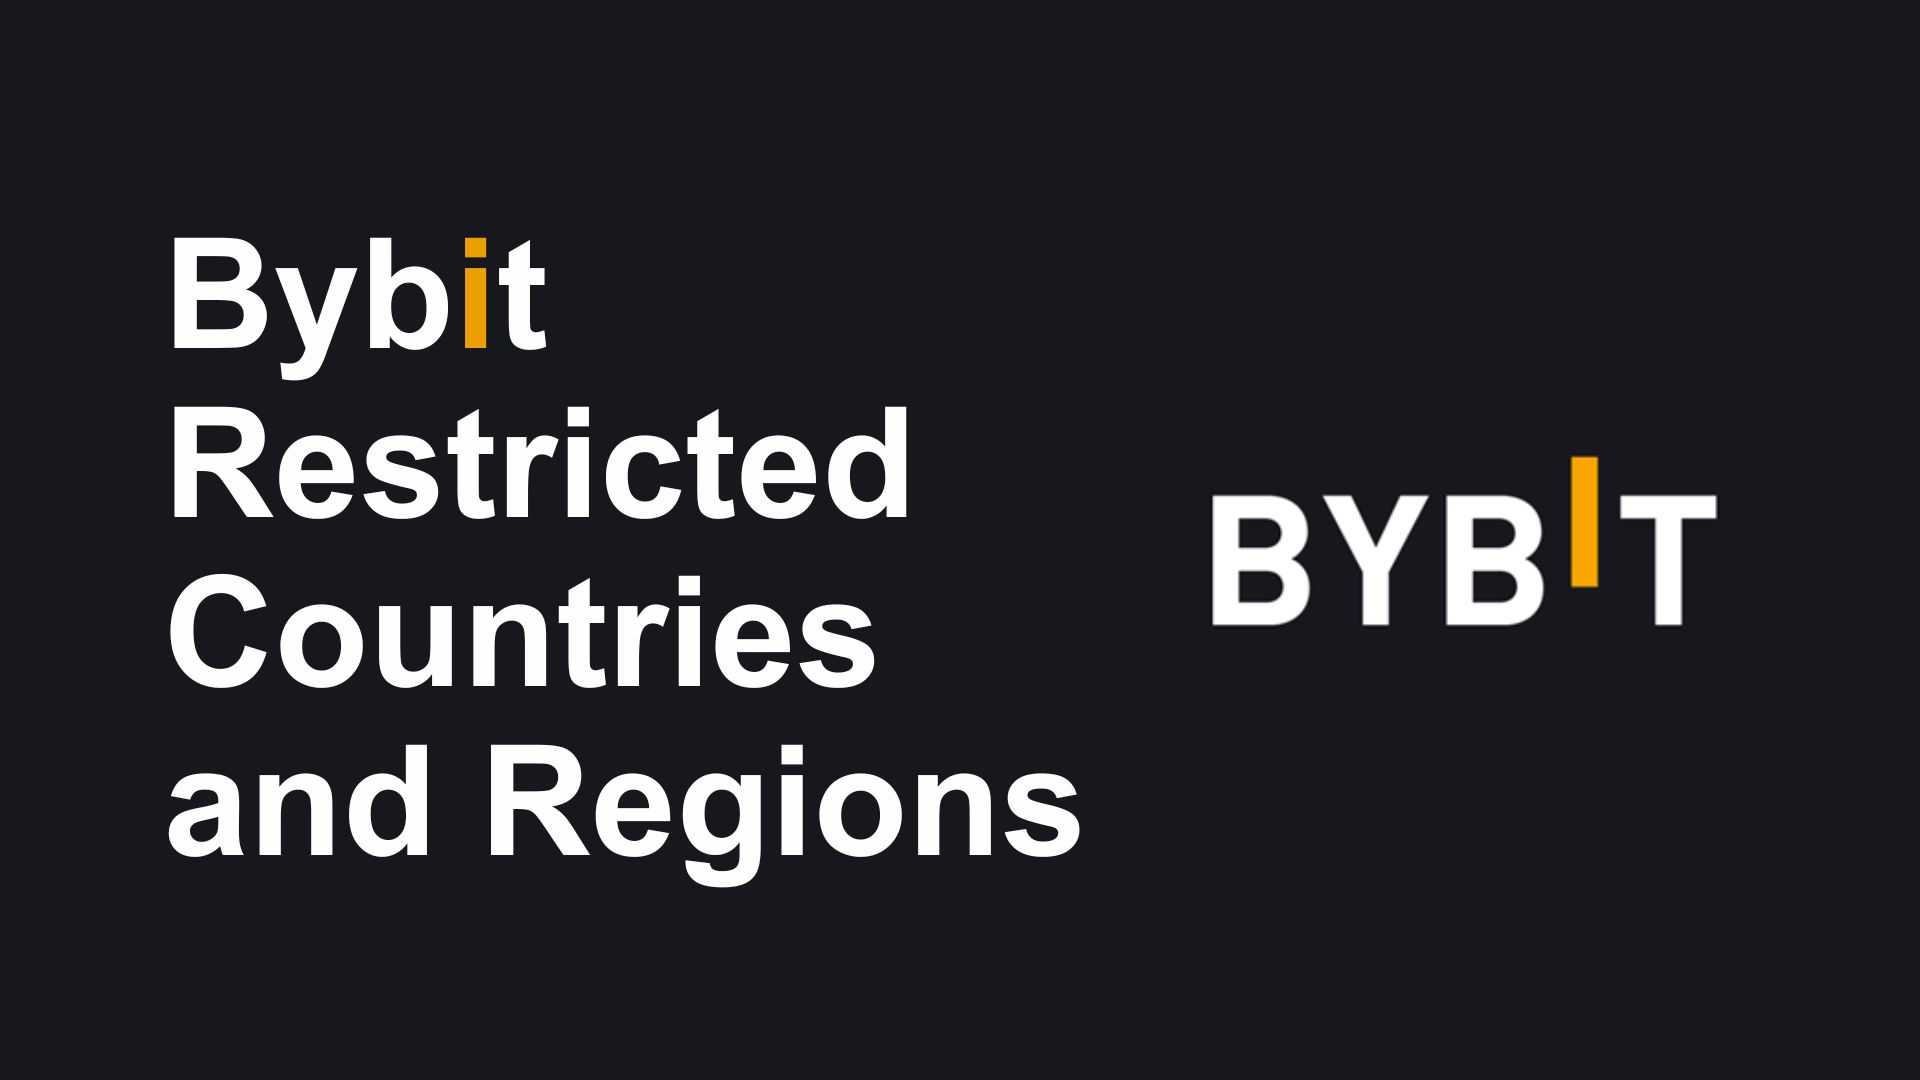 Bybit Restricted Countries and Regions